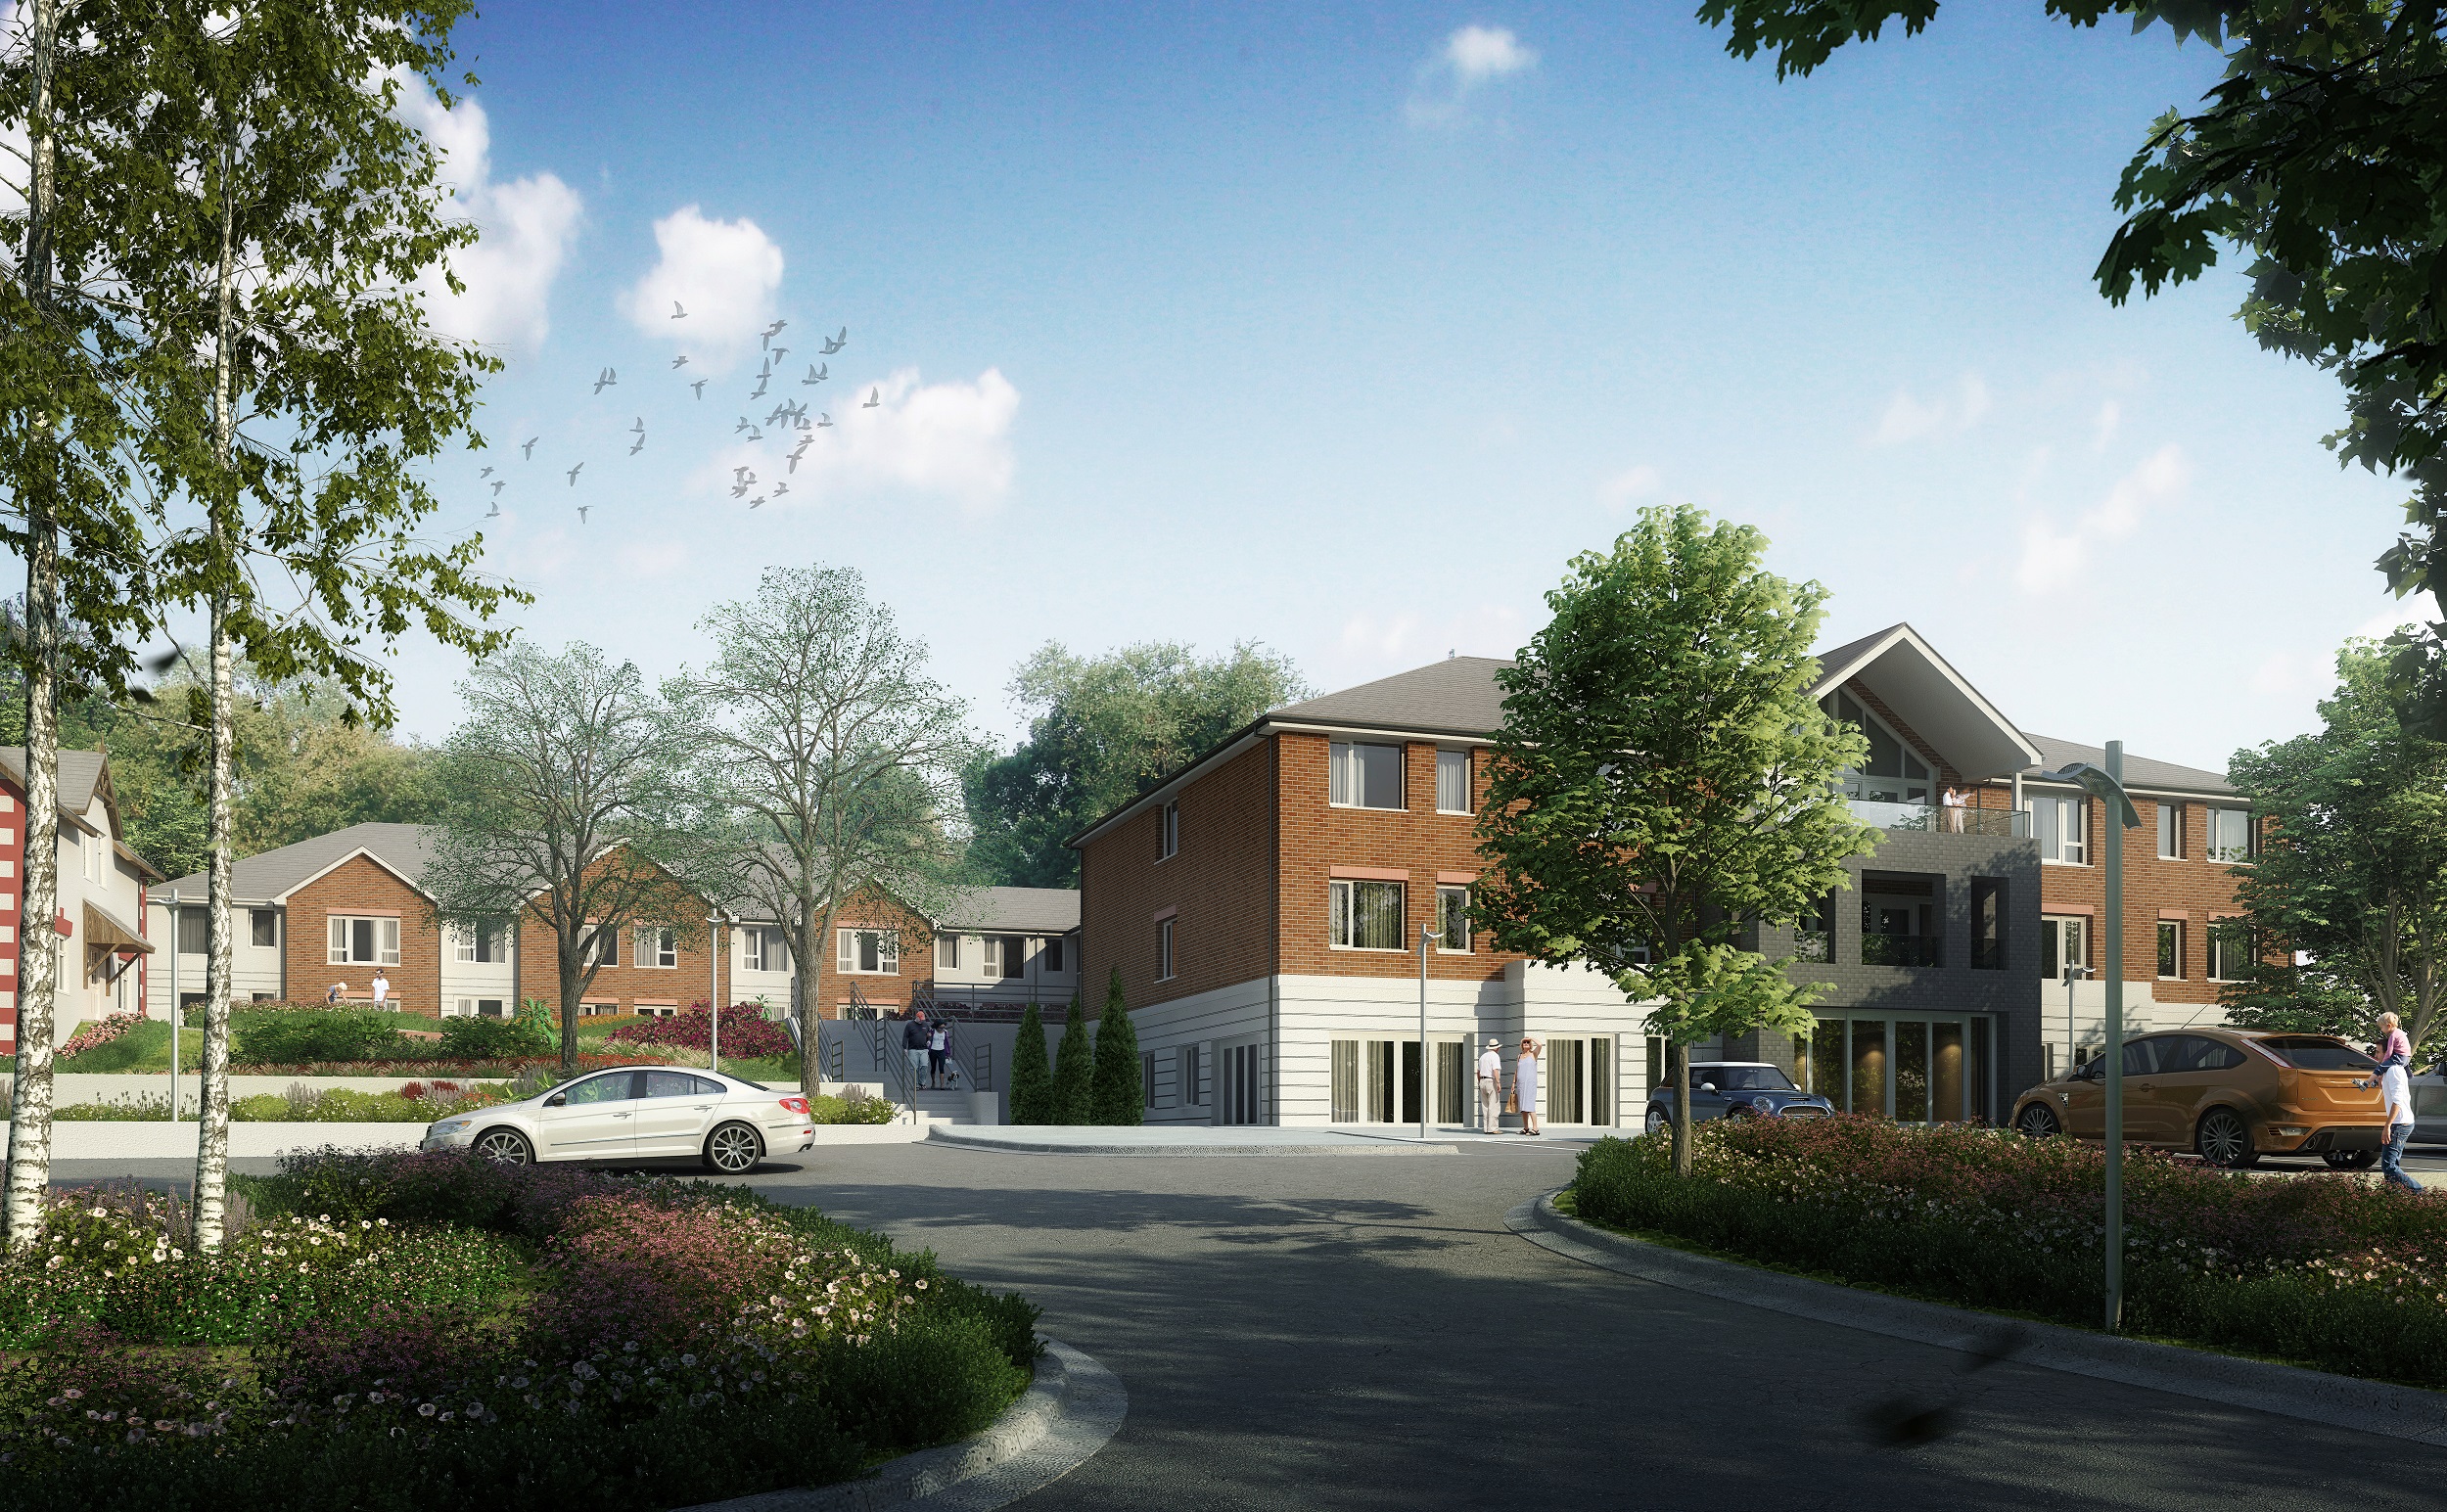 Carterwood reports support planning application for 80-suite care home in Sevenoaks